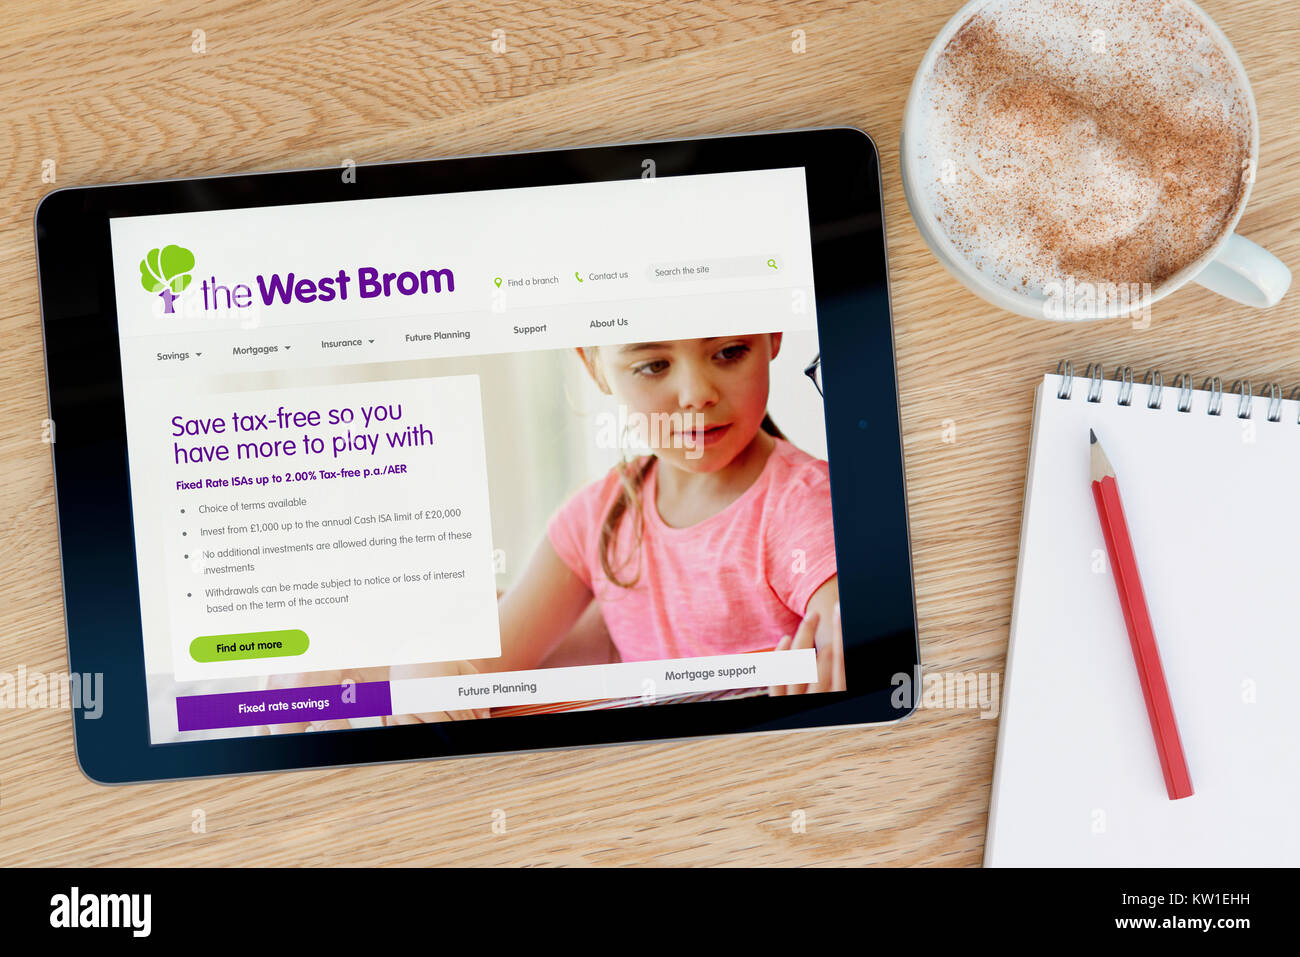 The West Brom website on an iPad tablet device, resting on a wooden table beside a notepad, pencil and cup of coffee (Editorial only) Stock Photo